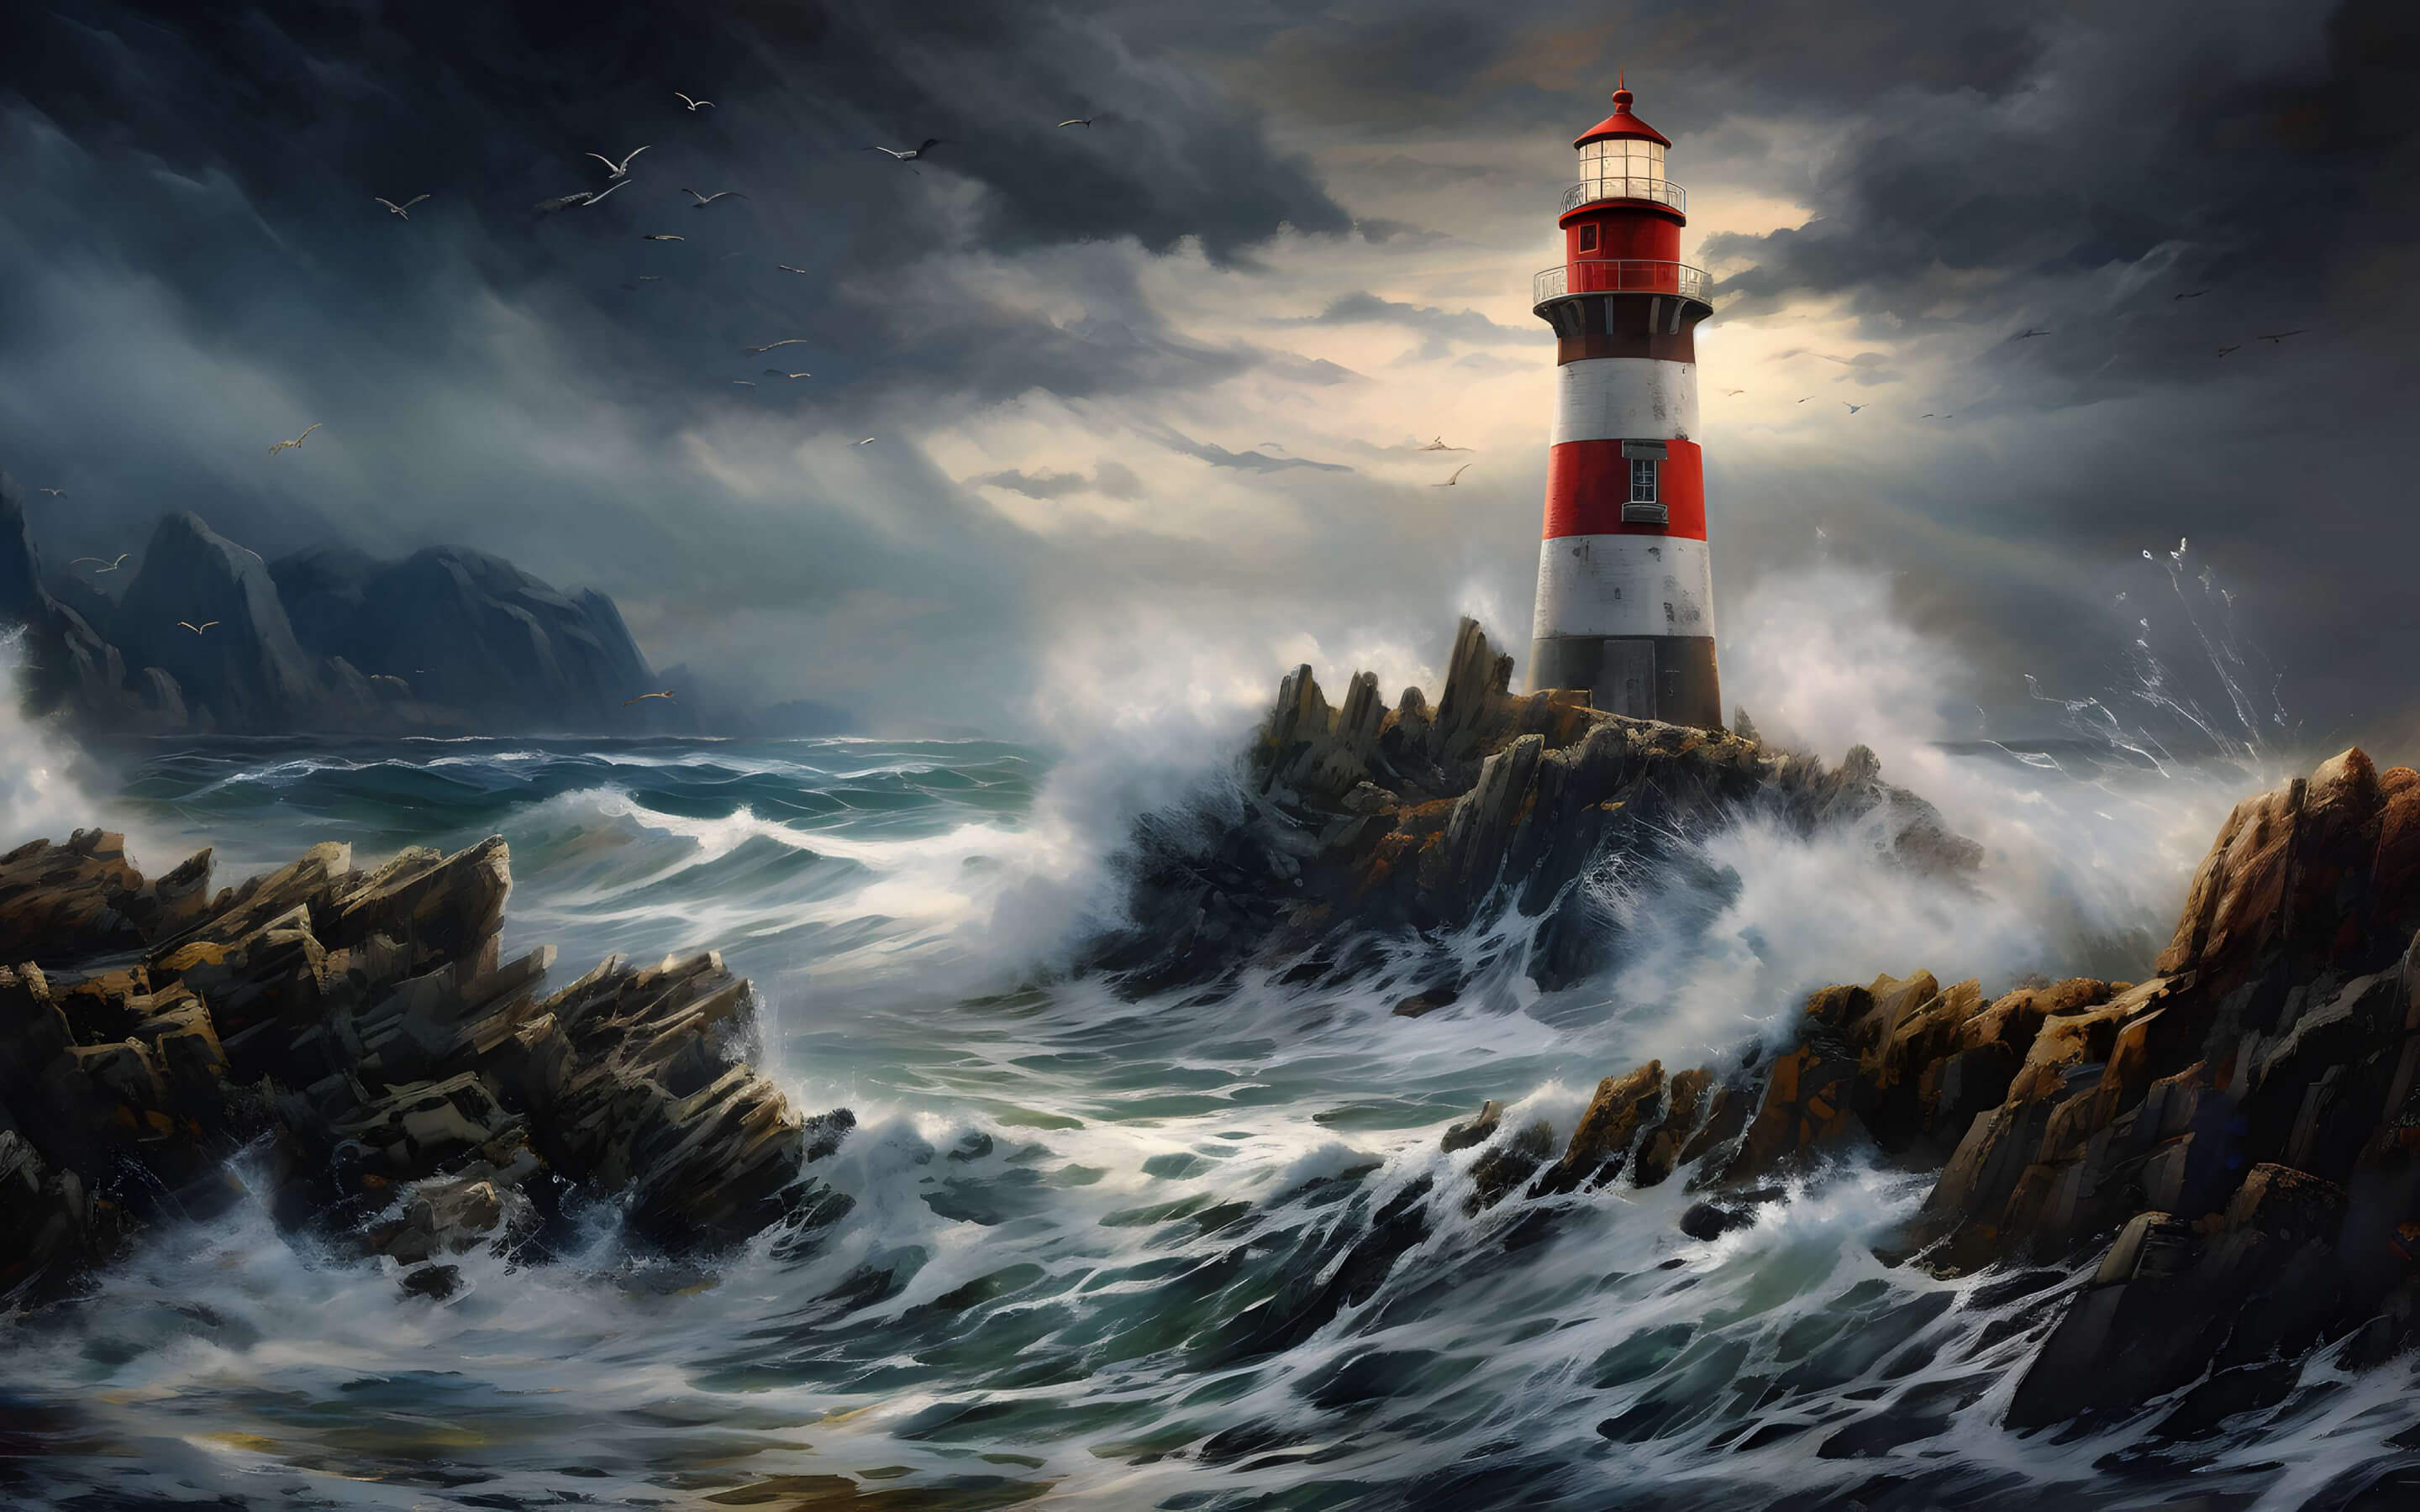 Lighthouse in the ocean waves wallpaper 2880x1800